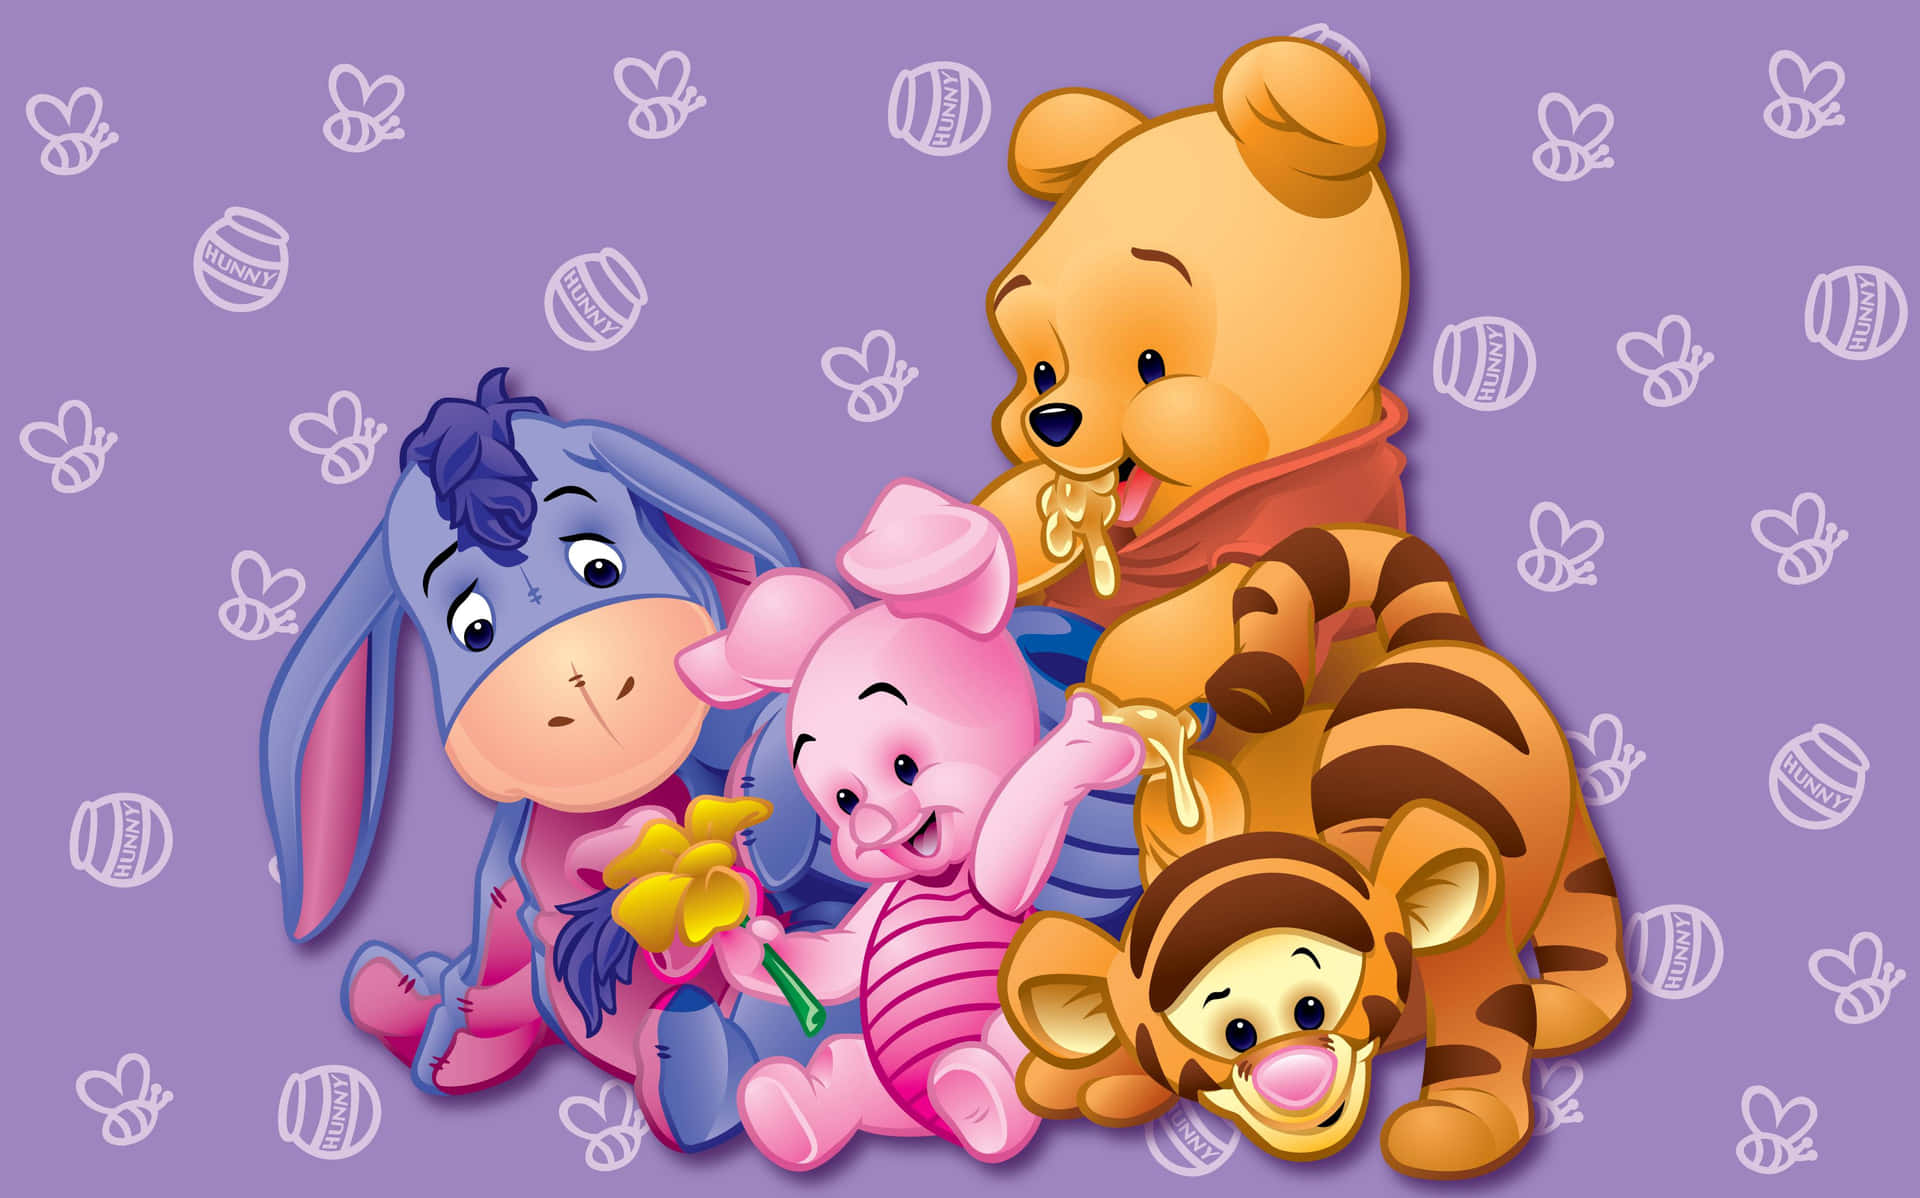 Enjoy the classic Disney characters of Winnie the Pooh, Eeyore and Tigger having some fun in the Hundred Acre Wood! Wallpaper